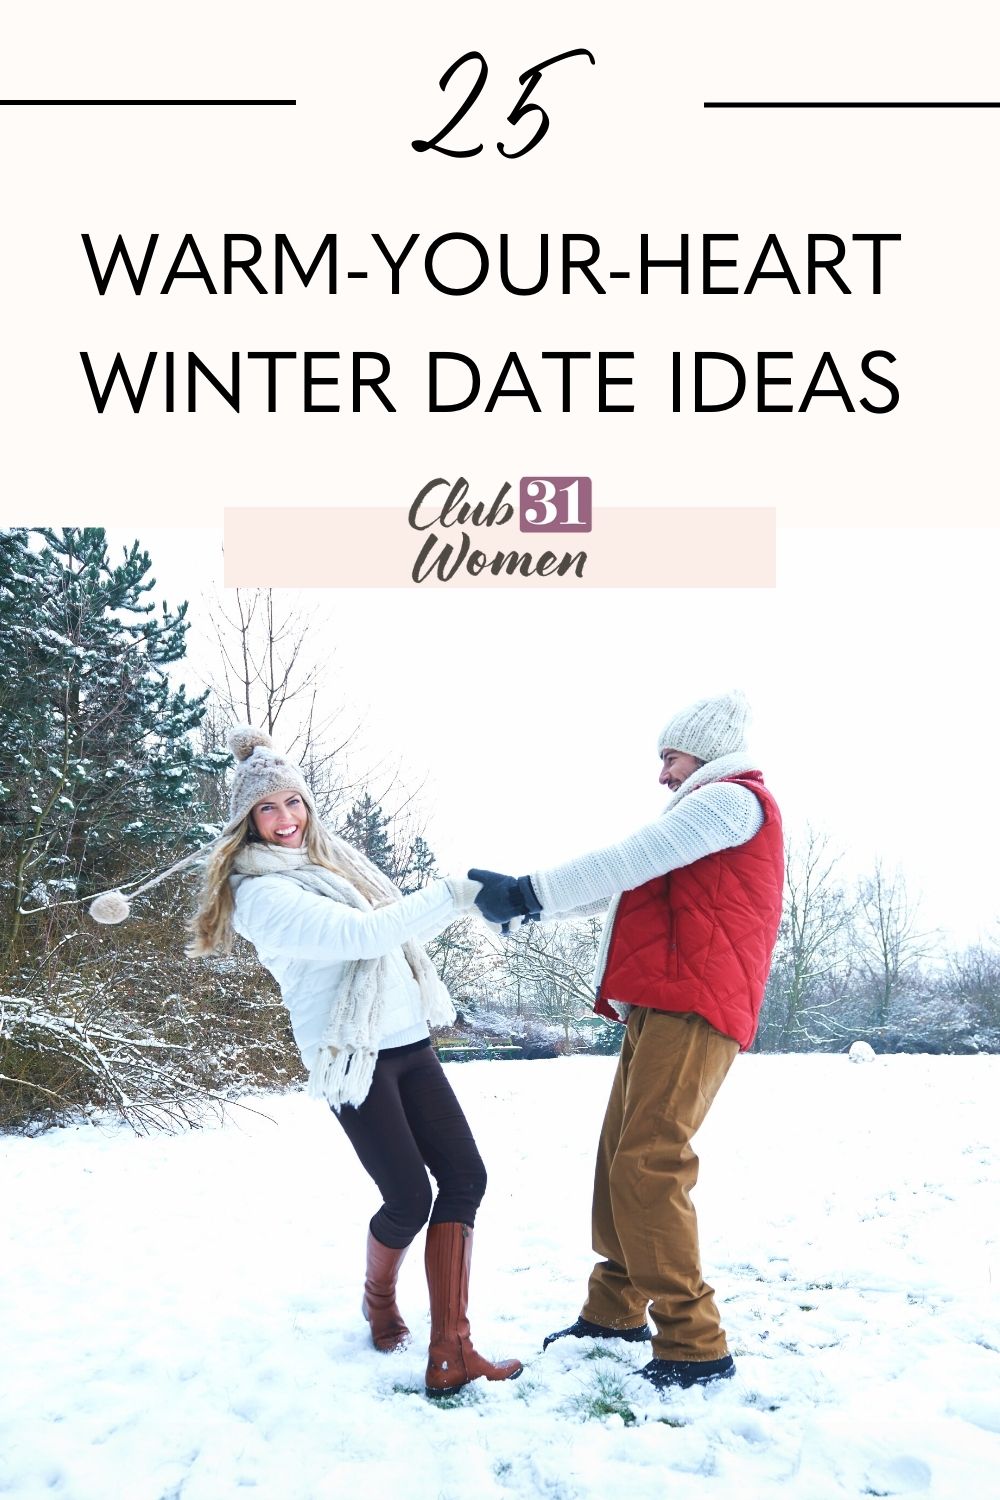 Looking for some simple, inexpensive and fun ideas for winter dates? Here are 25 creative ways to warm his heart and yours!  via @Club31Women